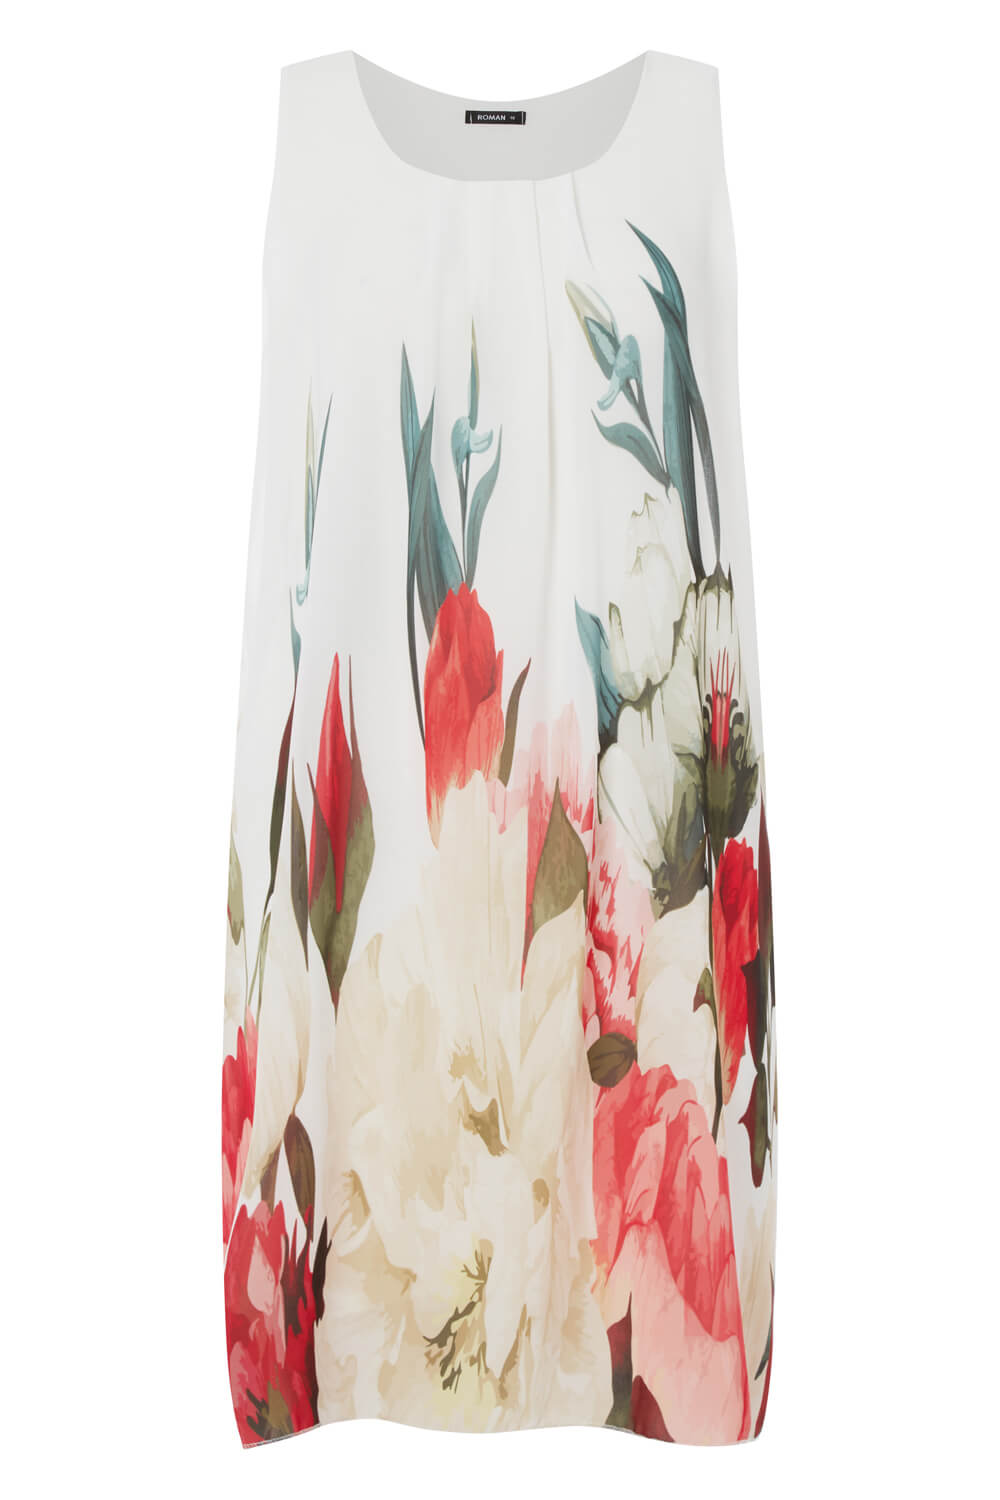 Ivory  Floral Print Swing Dress, Image 4 of 4